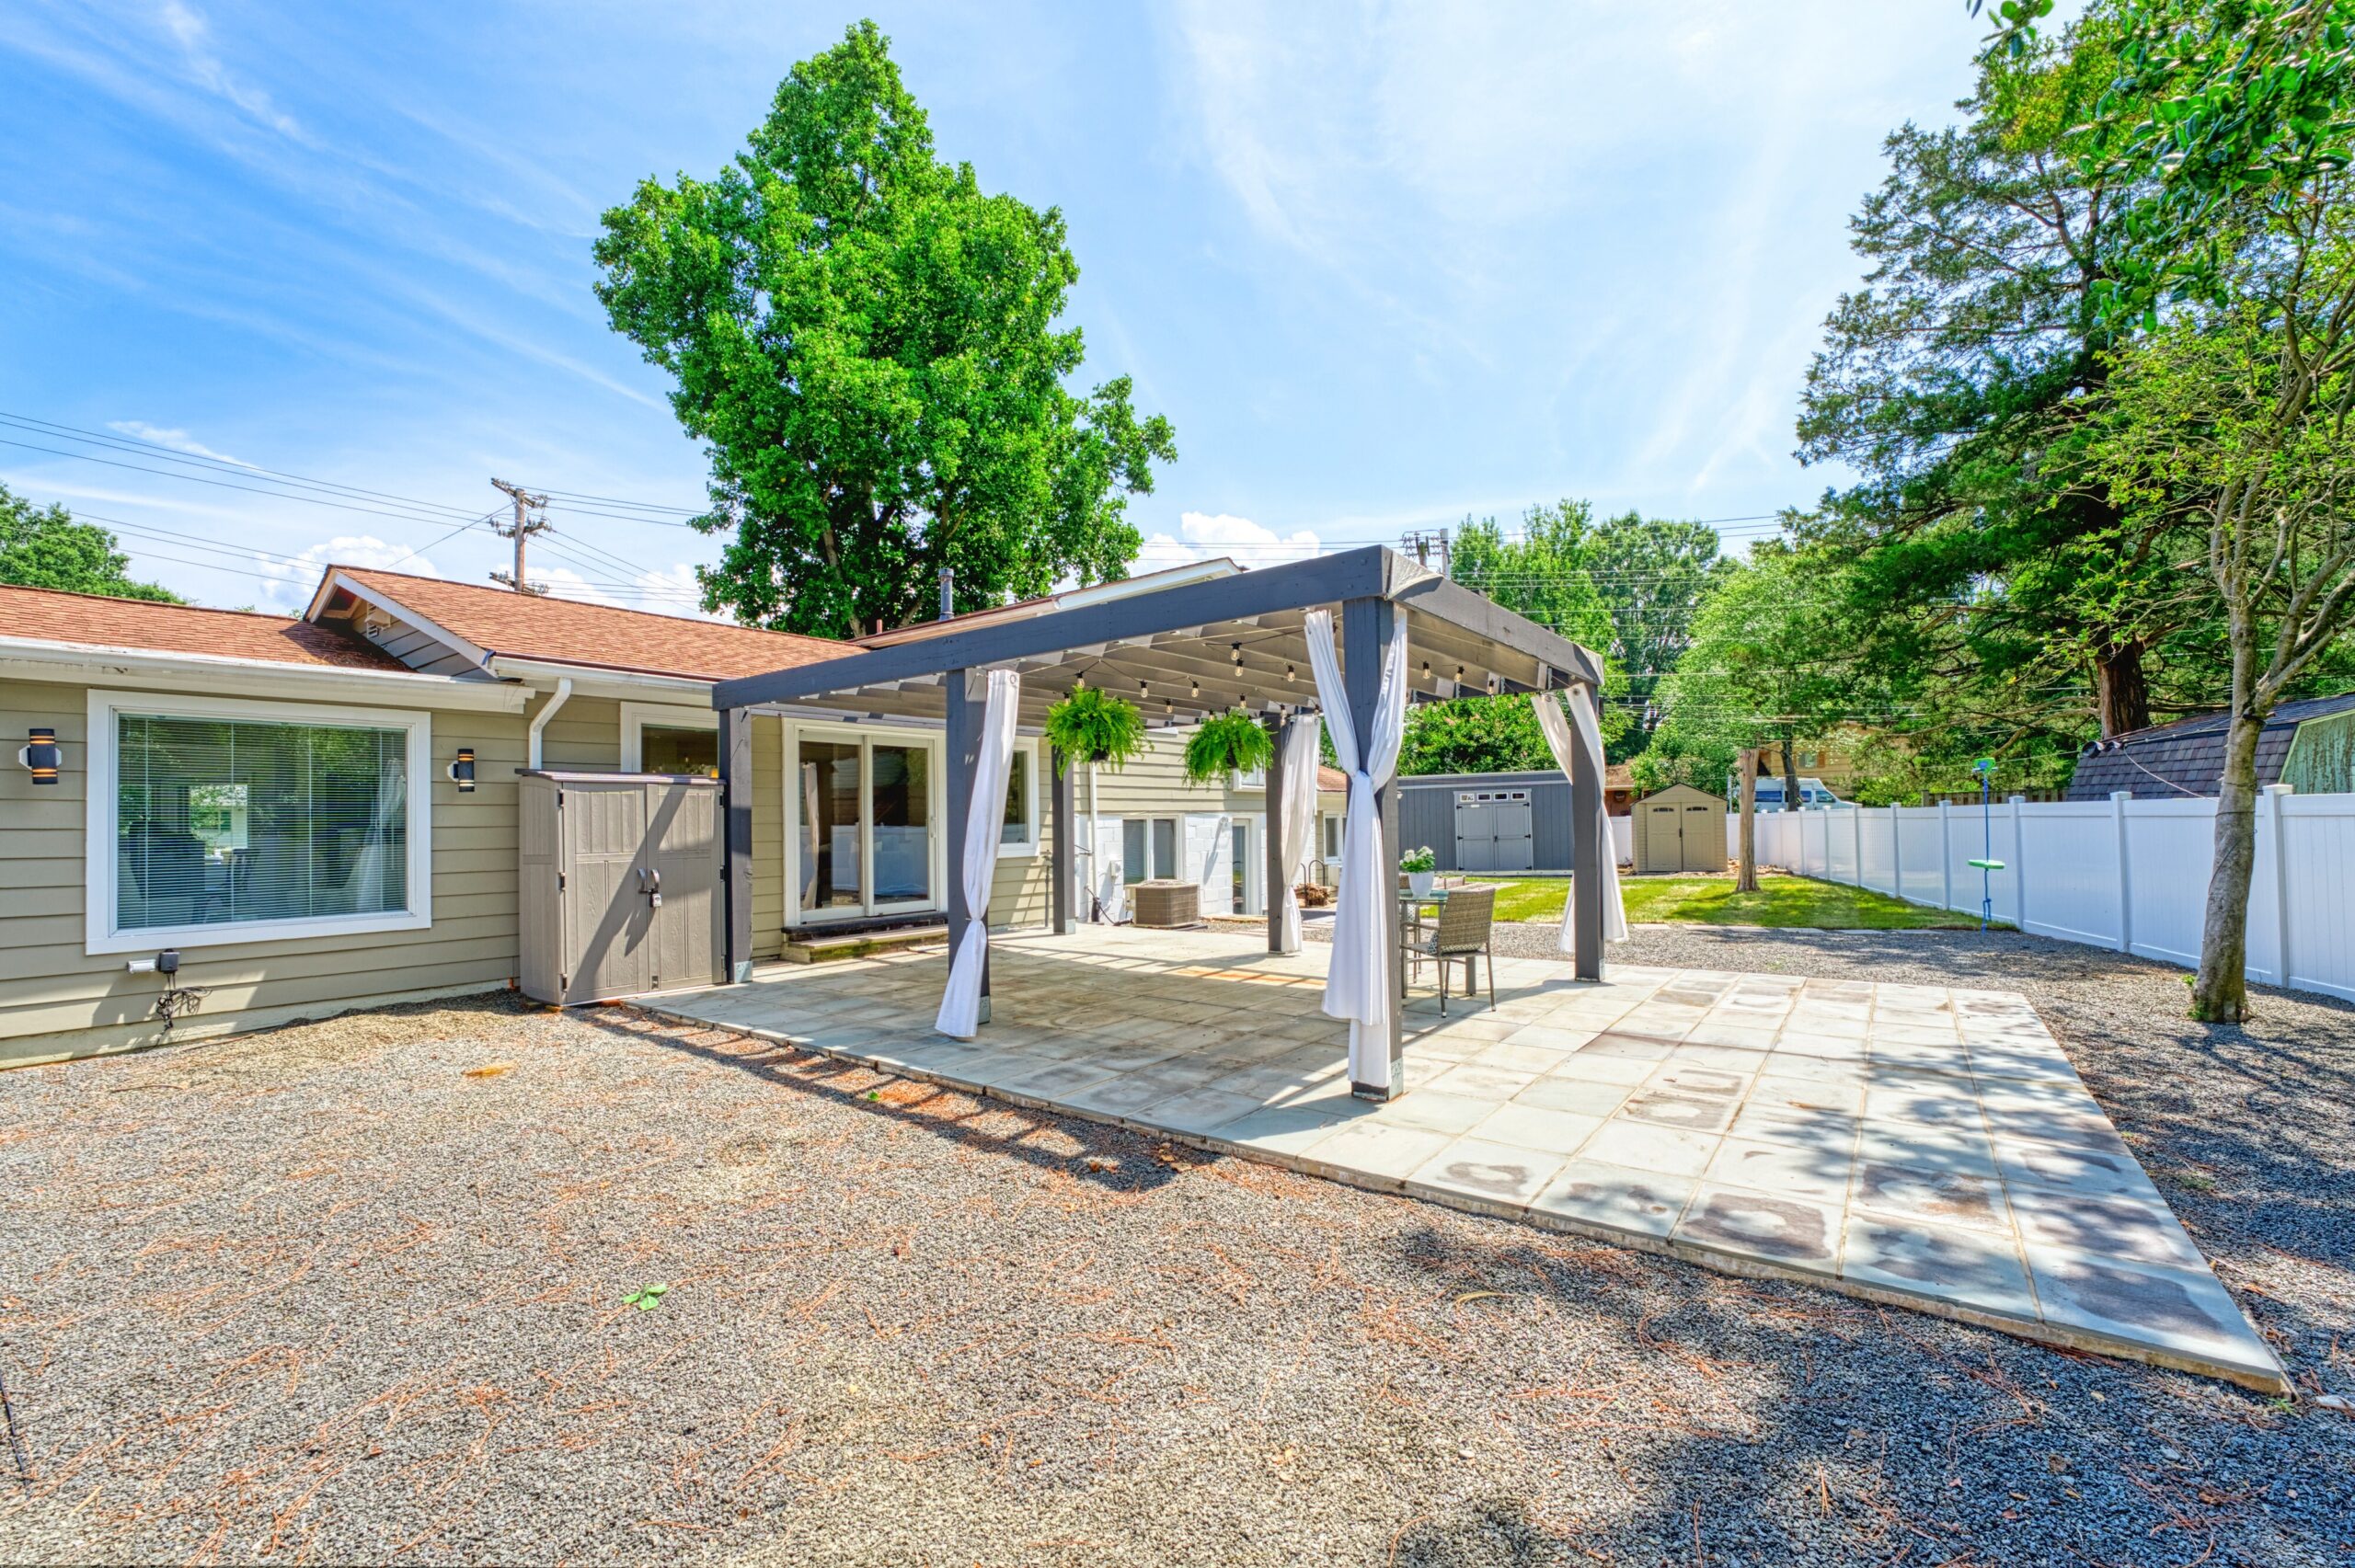 Professional exterior photo of 8320 Fort Hunt Rd, Alexandria - showing the backyard from one corner of the fenced lot with a large pergola on an even larger patio with lush landscaping in the background